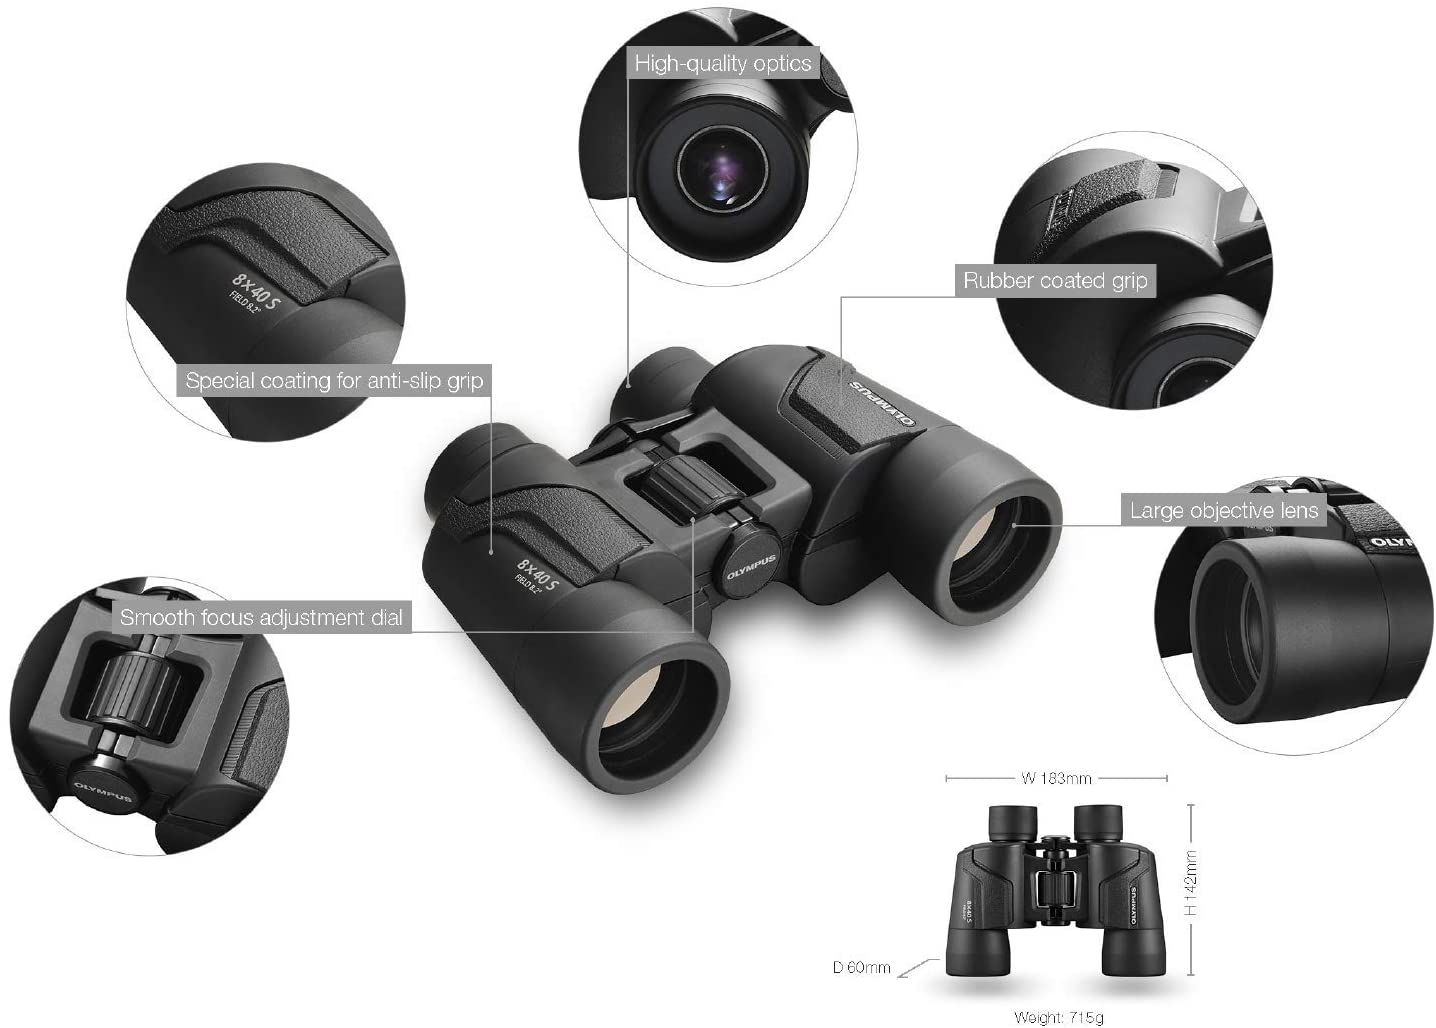 Clearance Olympus Binocular 8x40 S - Ideal for Nature Observation, Wildlife, Birdwatching